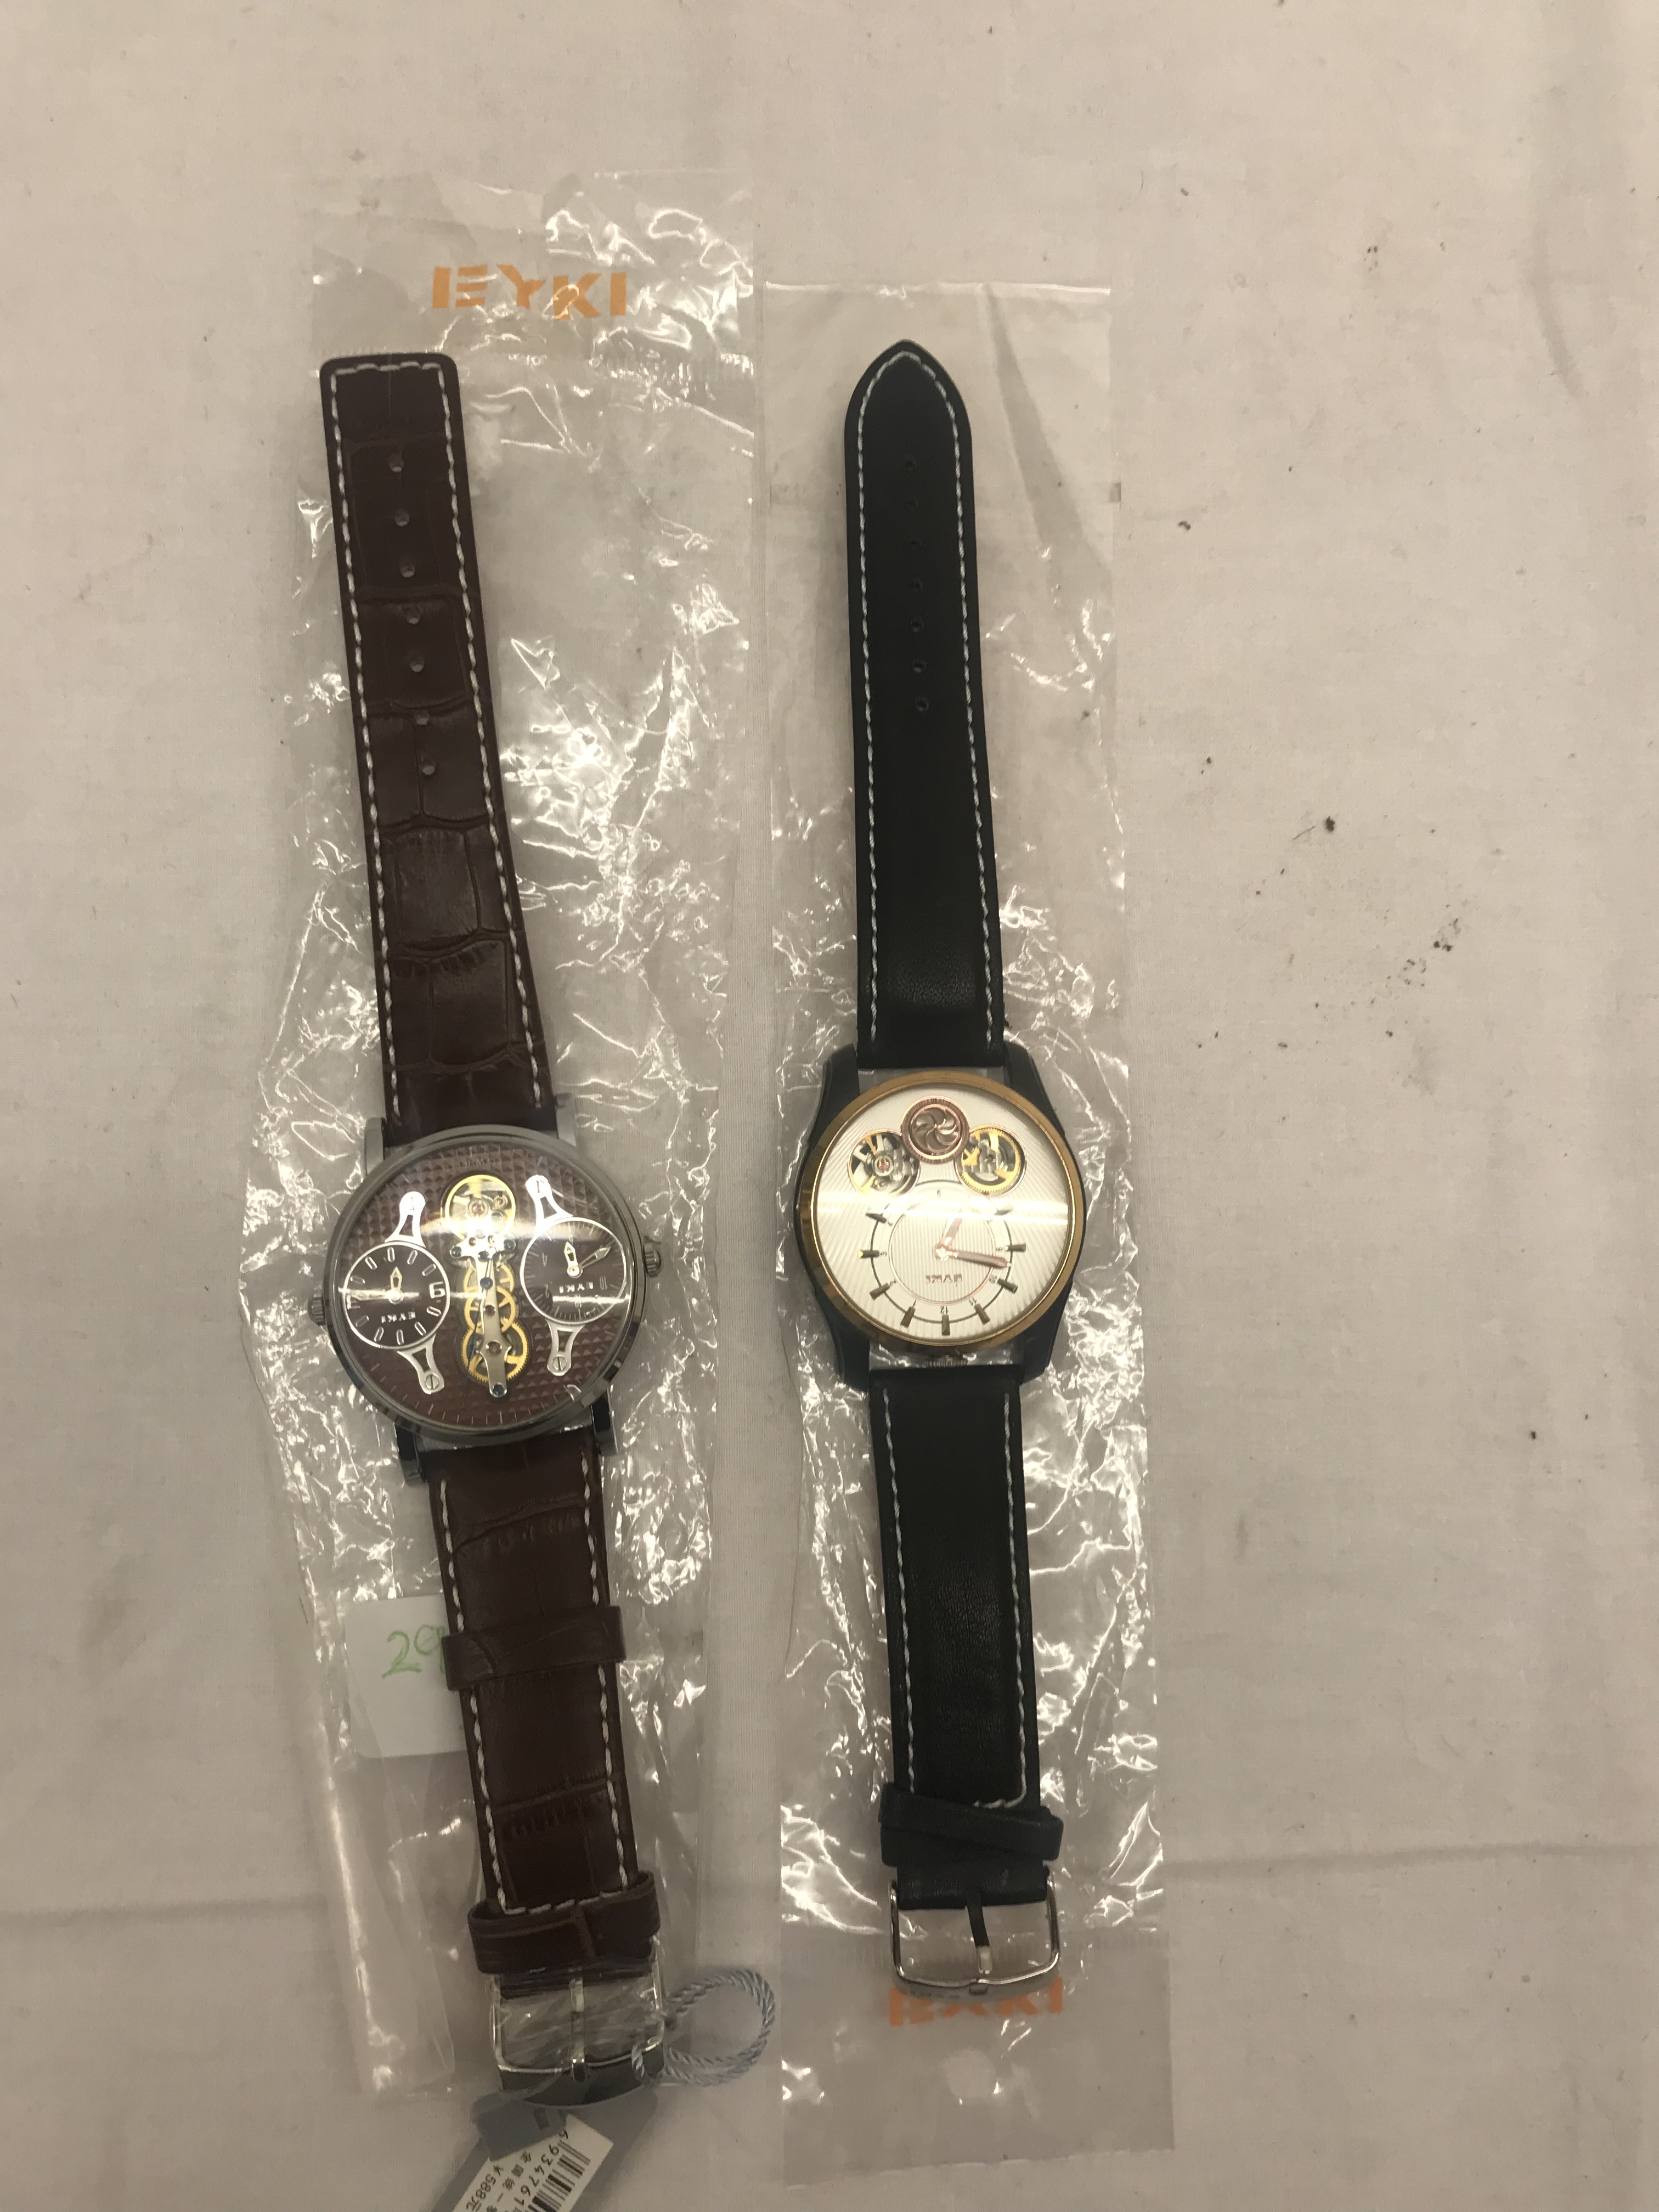 Two EYKI New Automatic gentlemens' wristwatches - Image 2 of 2